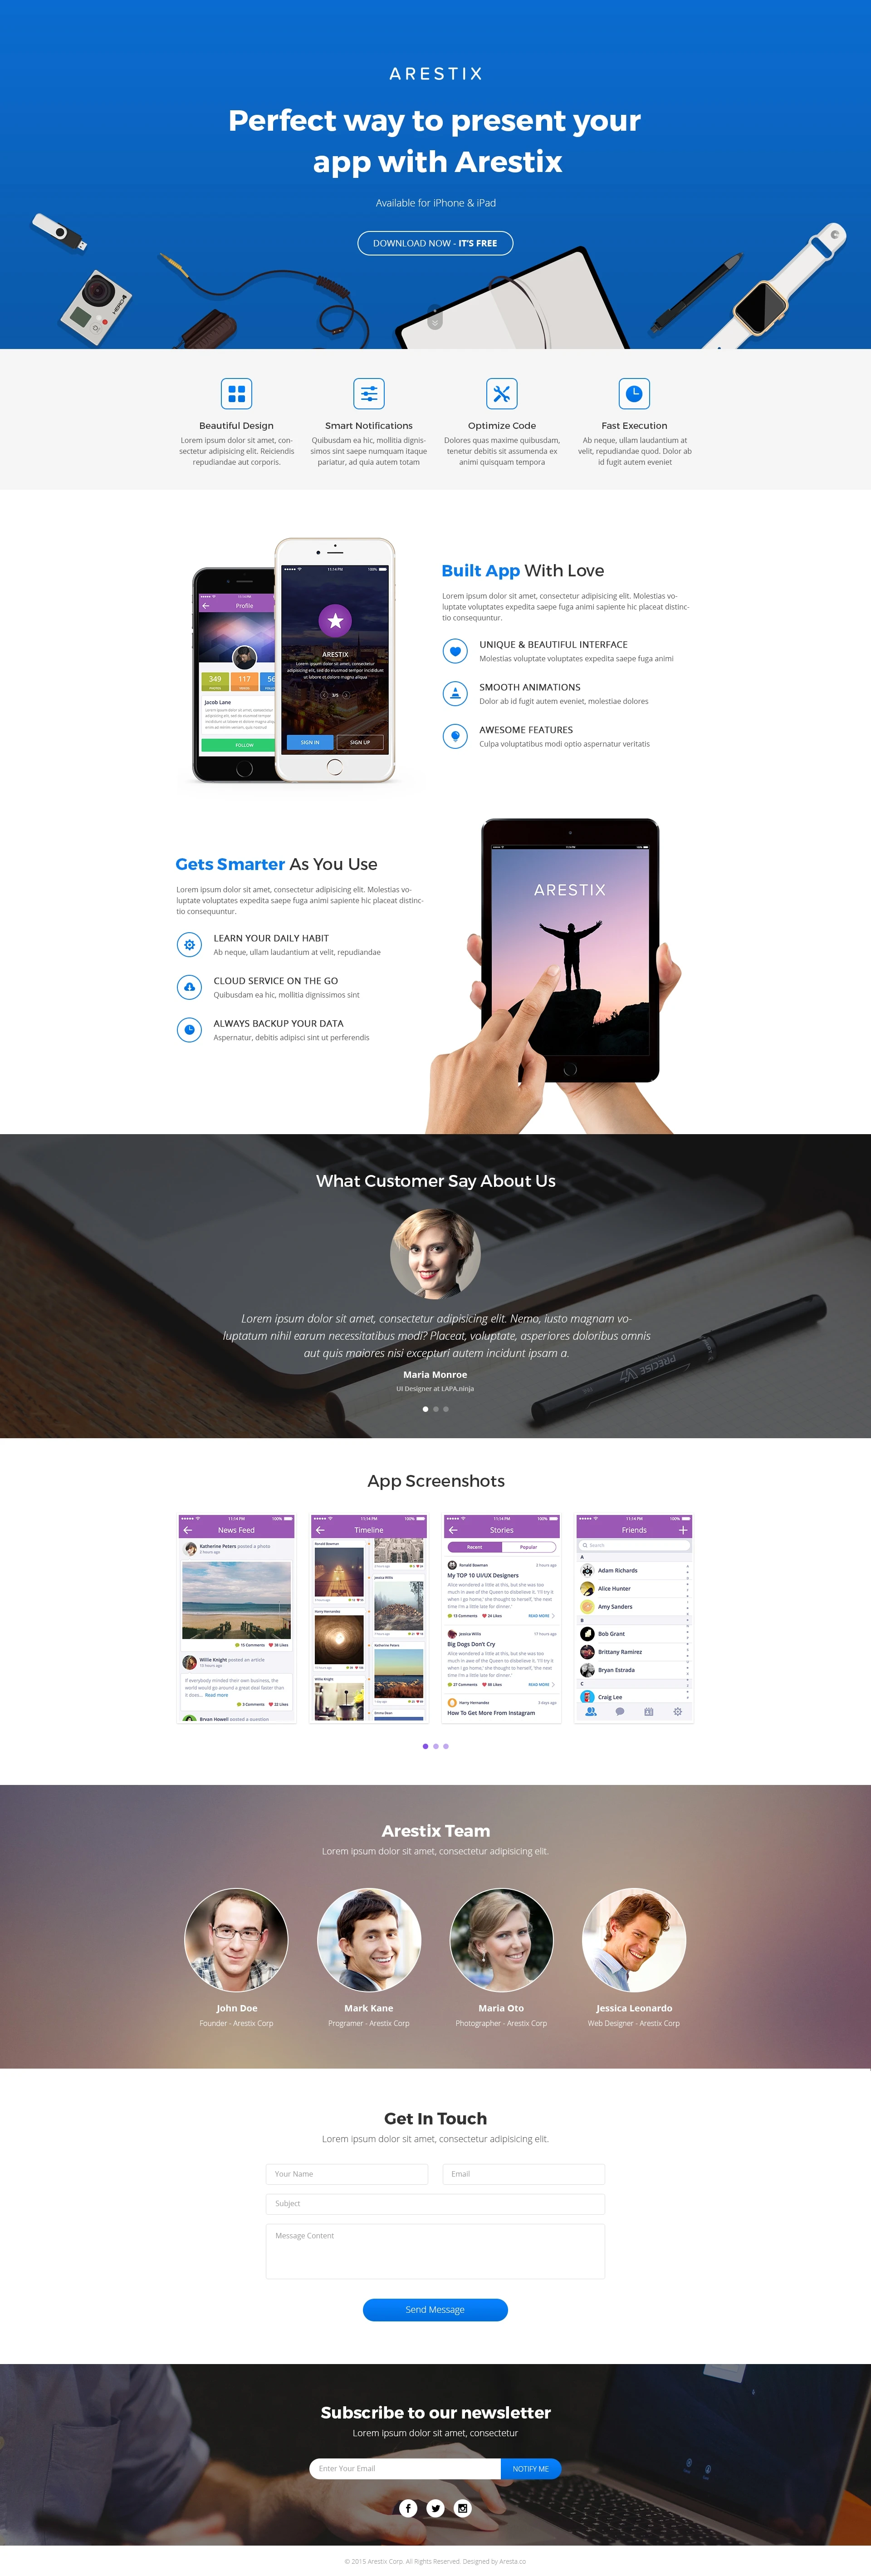 Arestix App Landing Page - Based on Bootstrap grid system, 03 theme colors. Beautiful, modern and clean design